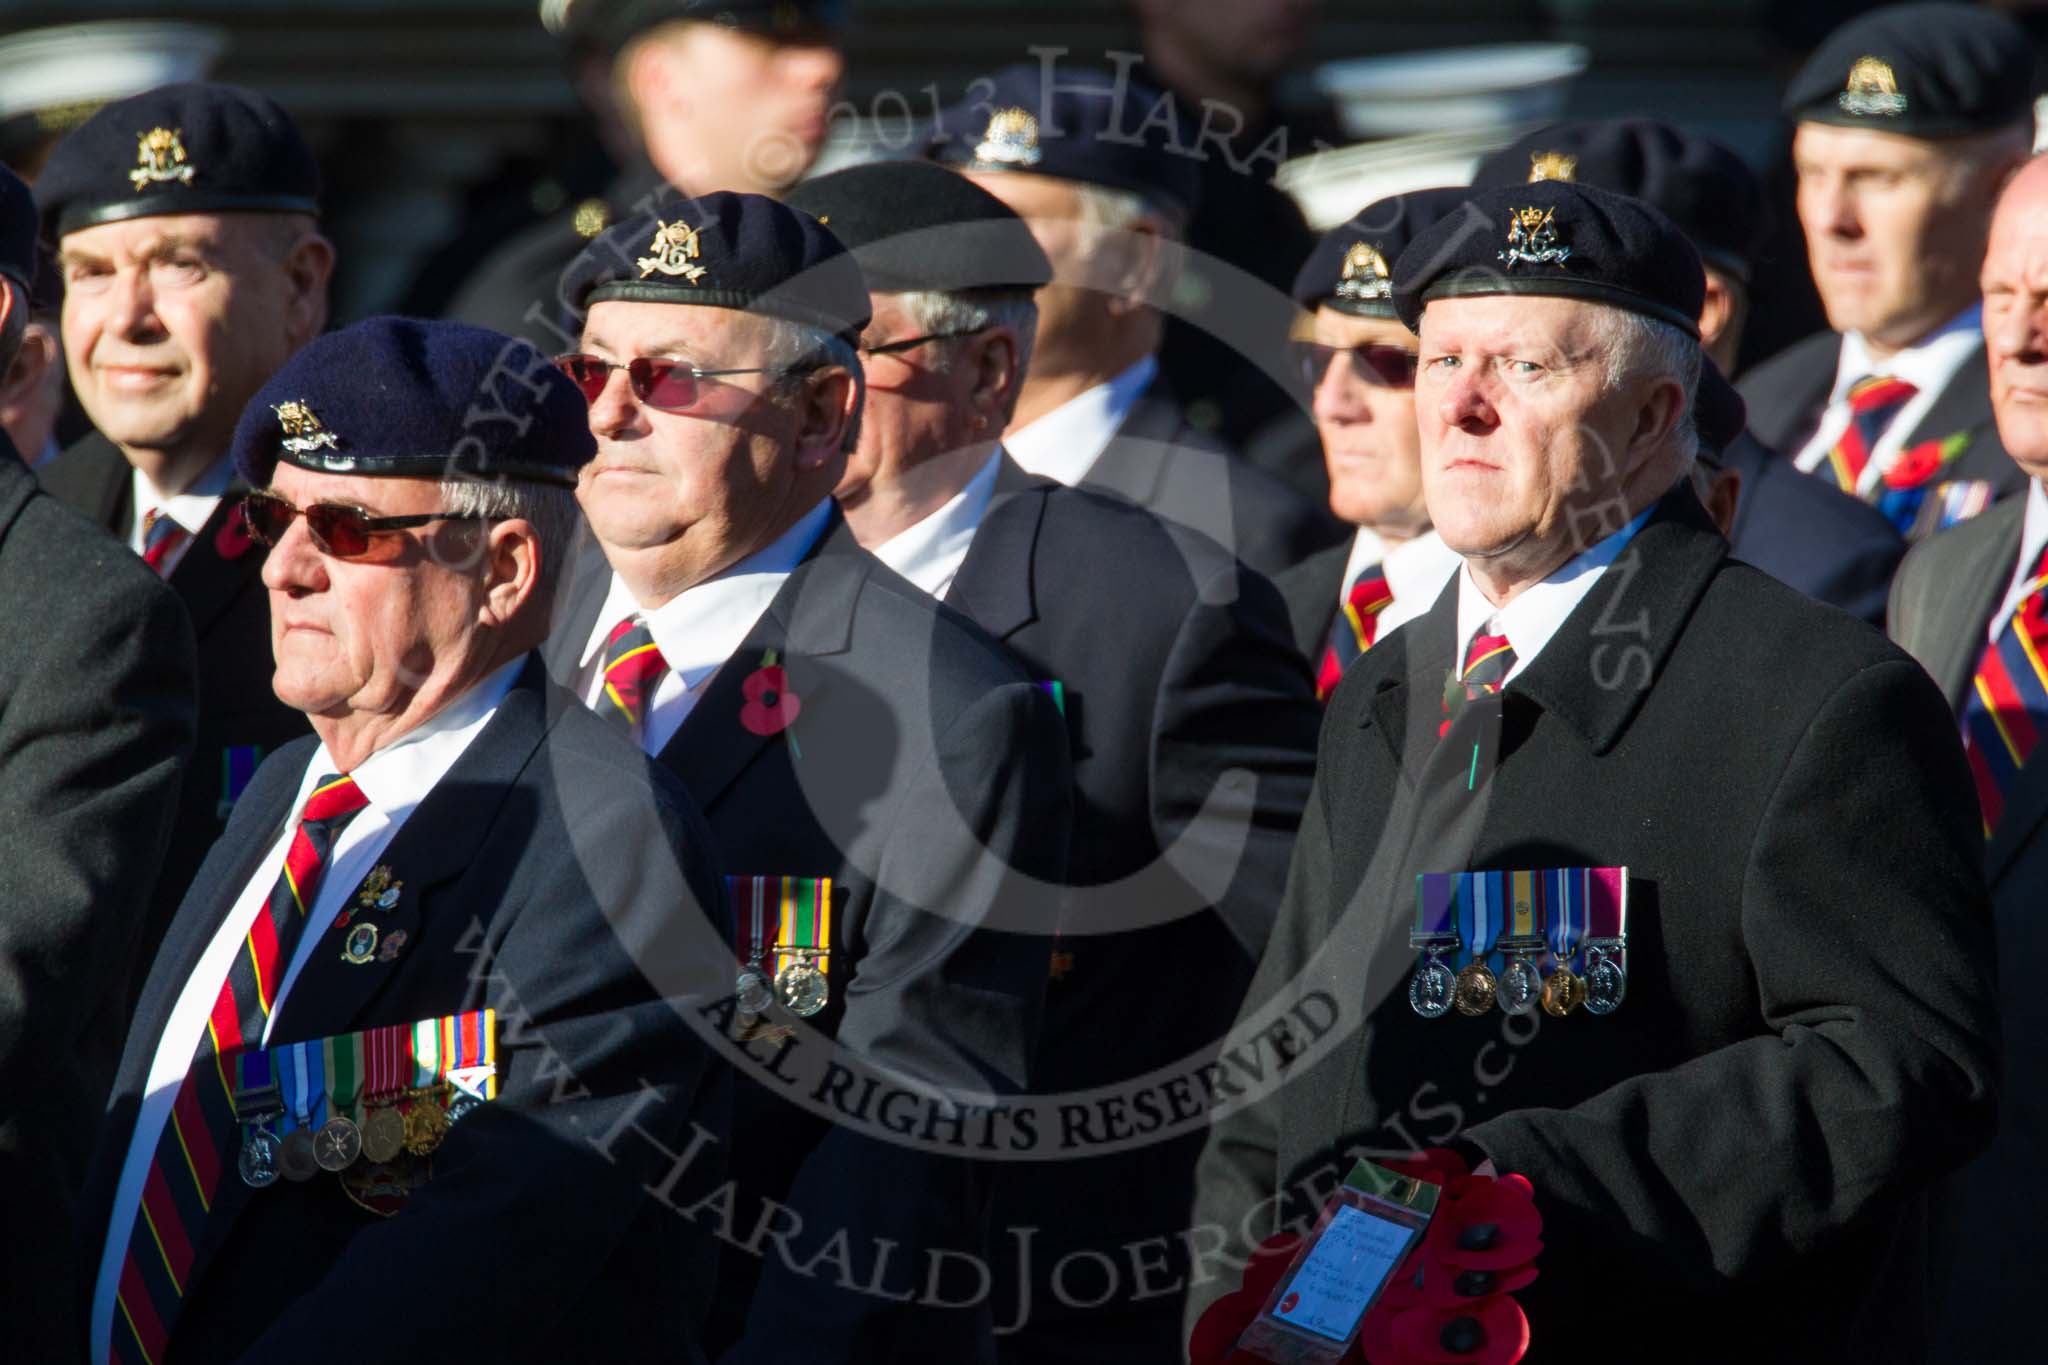 Remembrance Sunday at the Cenotaph in London 2014: Group B30 - 16/5th Queen's Royal Lancers.
Press stand opposite the Foreign Office building, Whitehall, London SW1,
London,
Greater London,
United Kingdom,
on 09 November 2014 at 12:13, image #1888